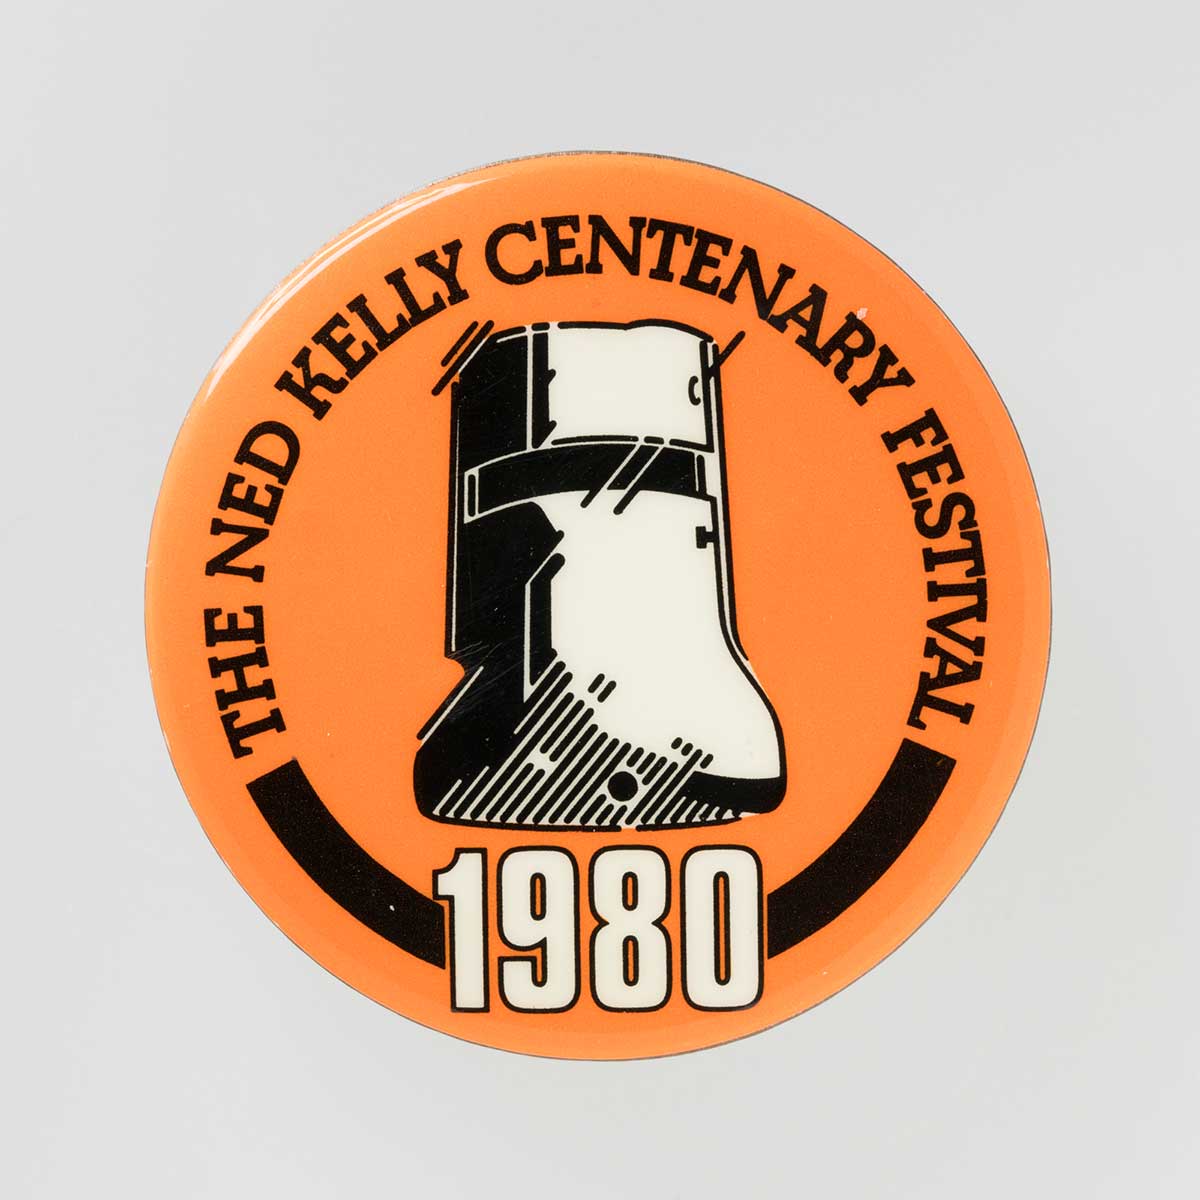 Circular badge. Black and white sketch depicting Ned Kelly mask on orange background. Black text around edge of badge "Ned Kelly Centenary Festival'. White text below mask "1980'.